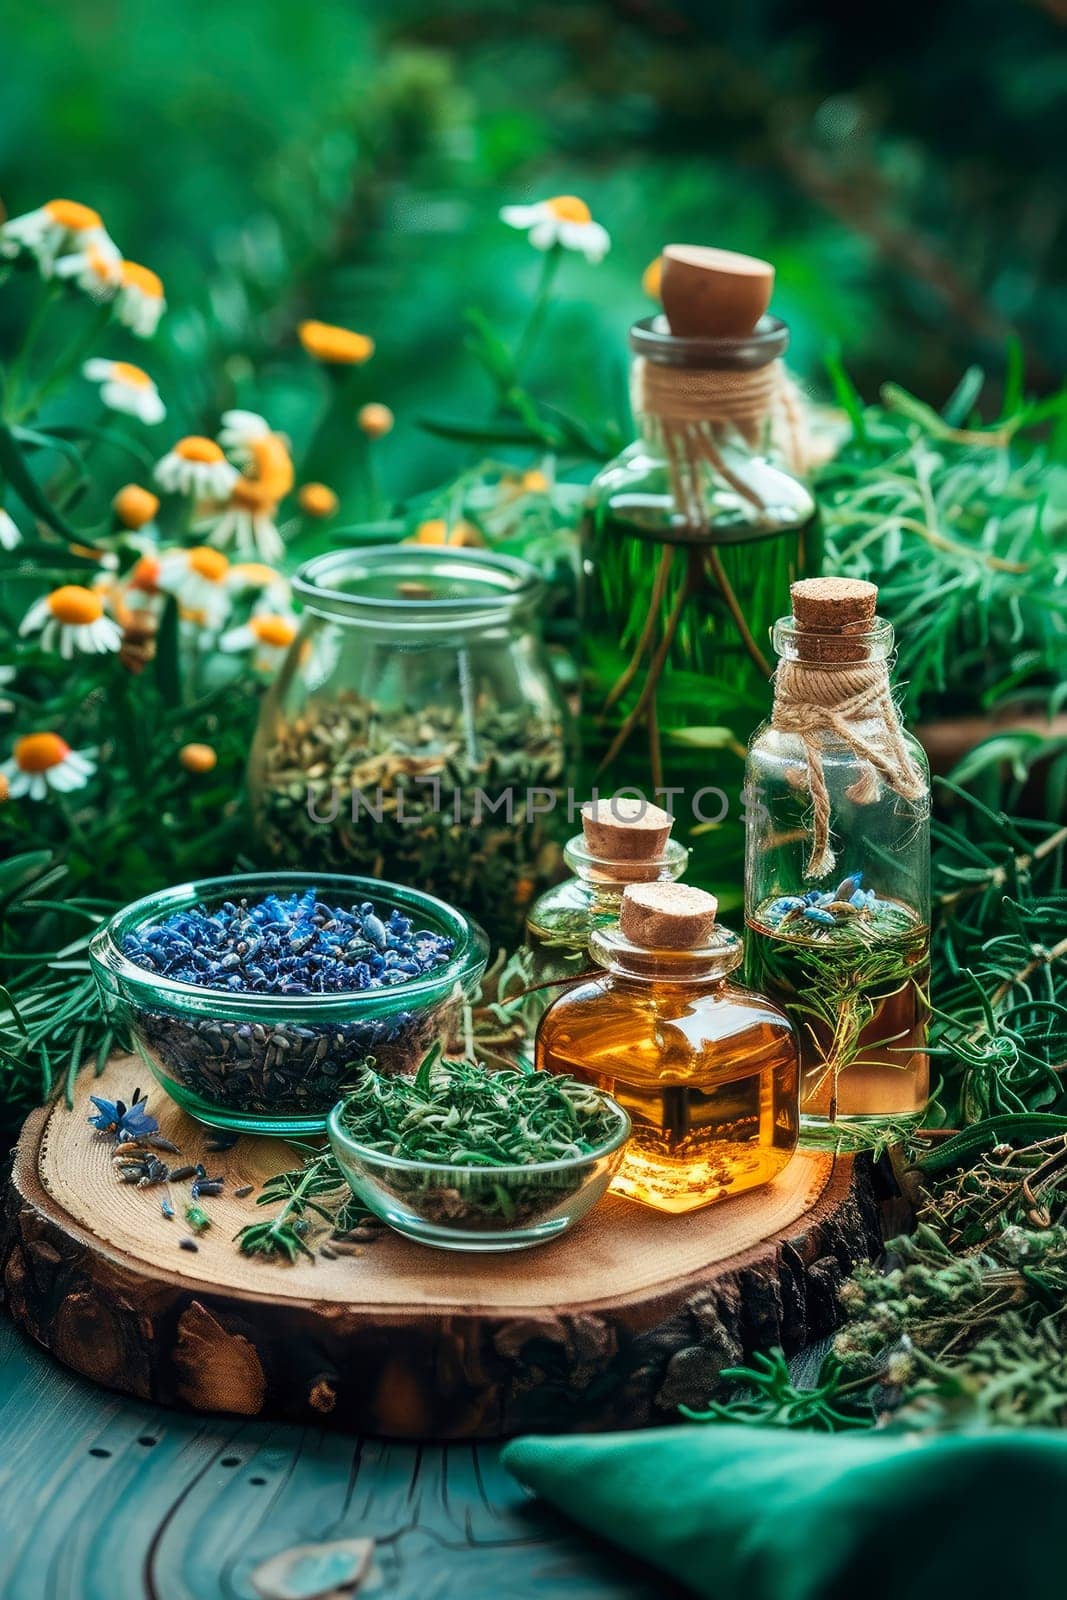 tinctures of flowers and herbs in a bottle. selective focus. by yanadjana